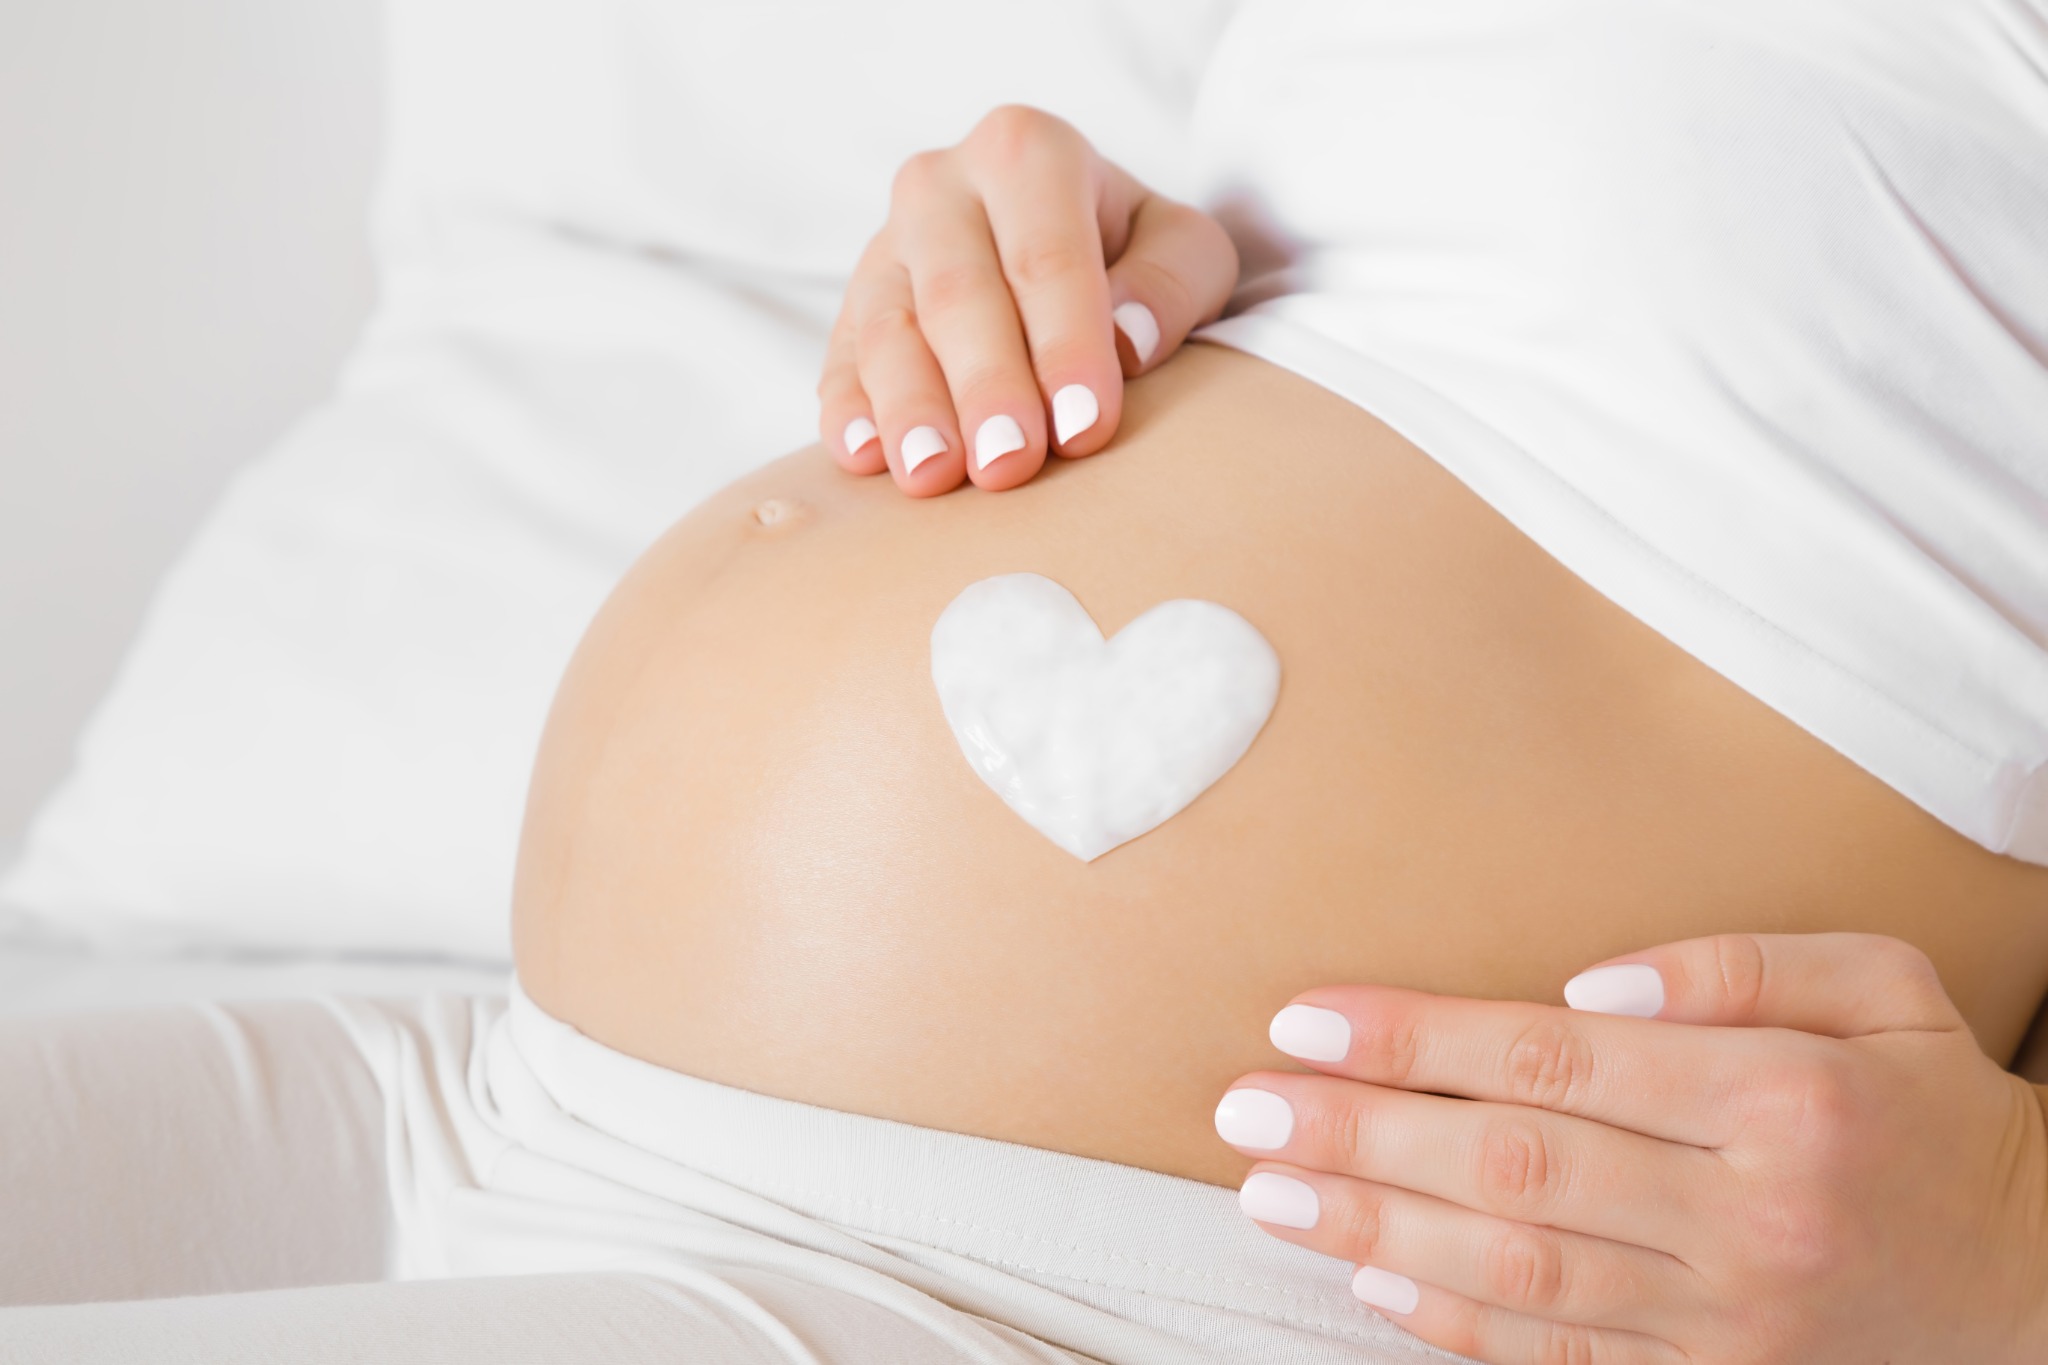 The benefits of prenatal massage are plentiful and can help you feel more comfortable during pregnancy.